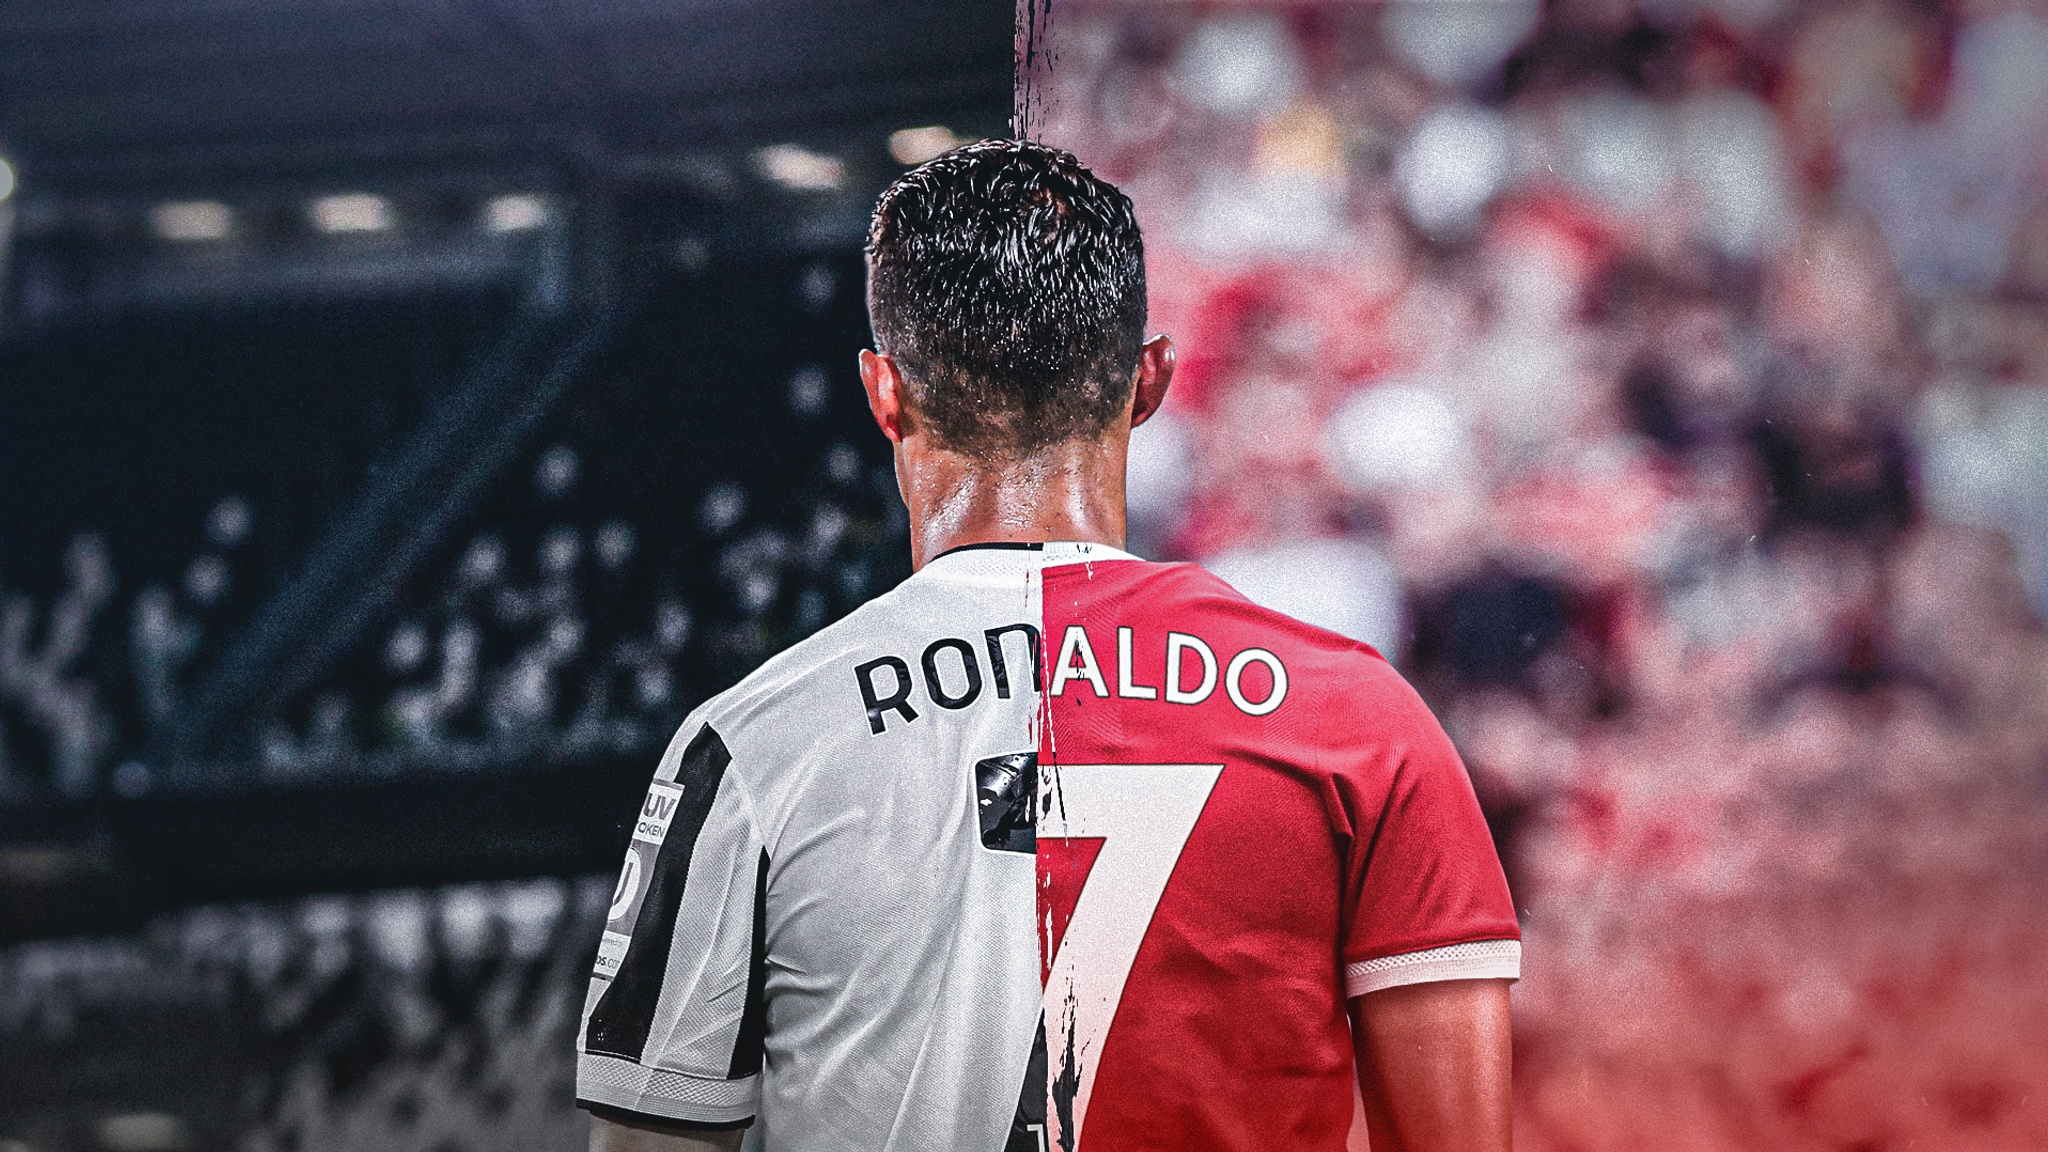 Cristiano Ronaldo's Manchester United return: How good is he at 36 years old and where does he fit into this team?